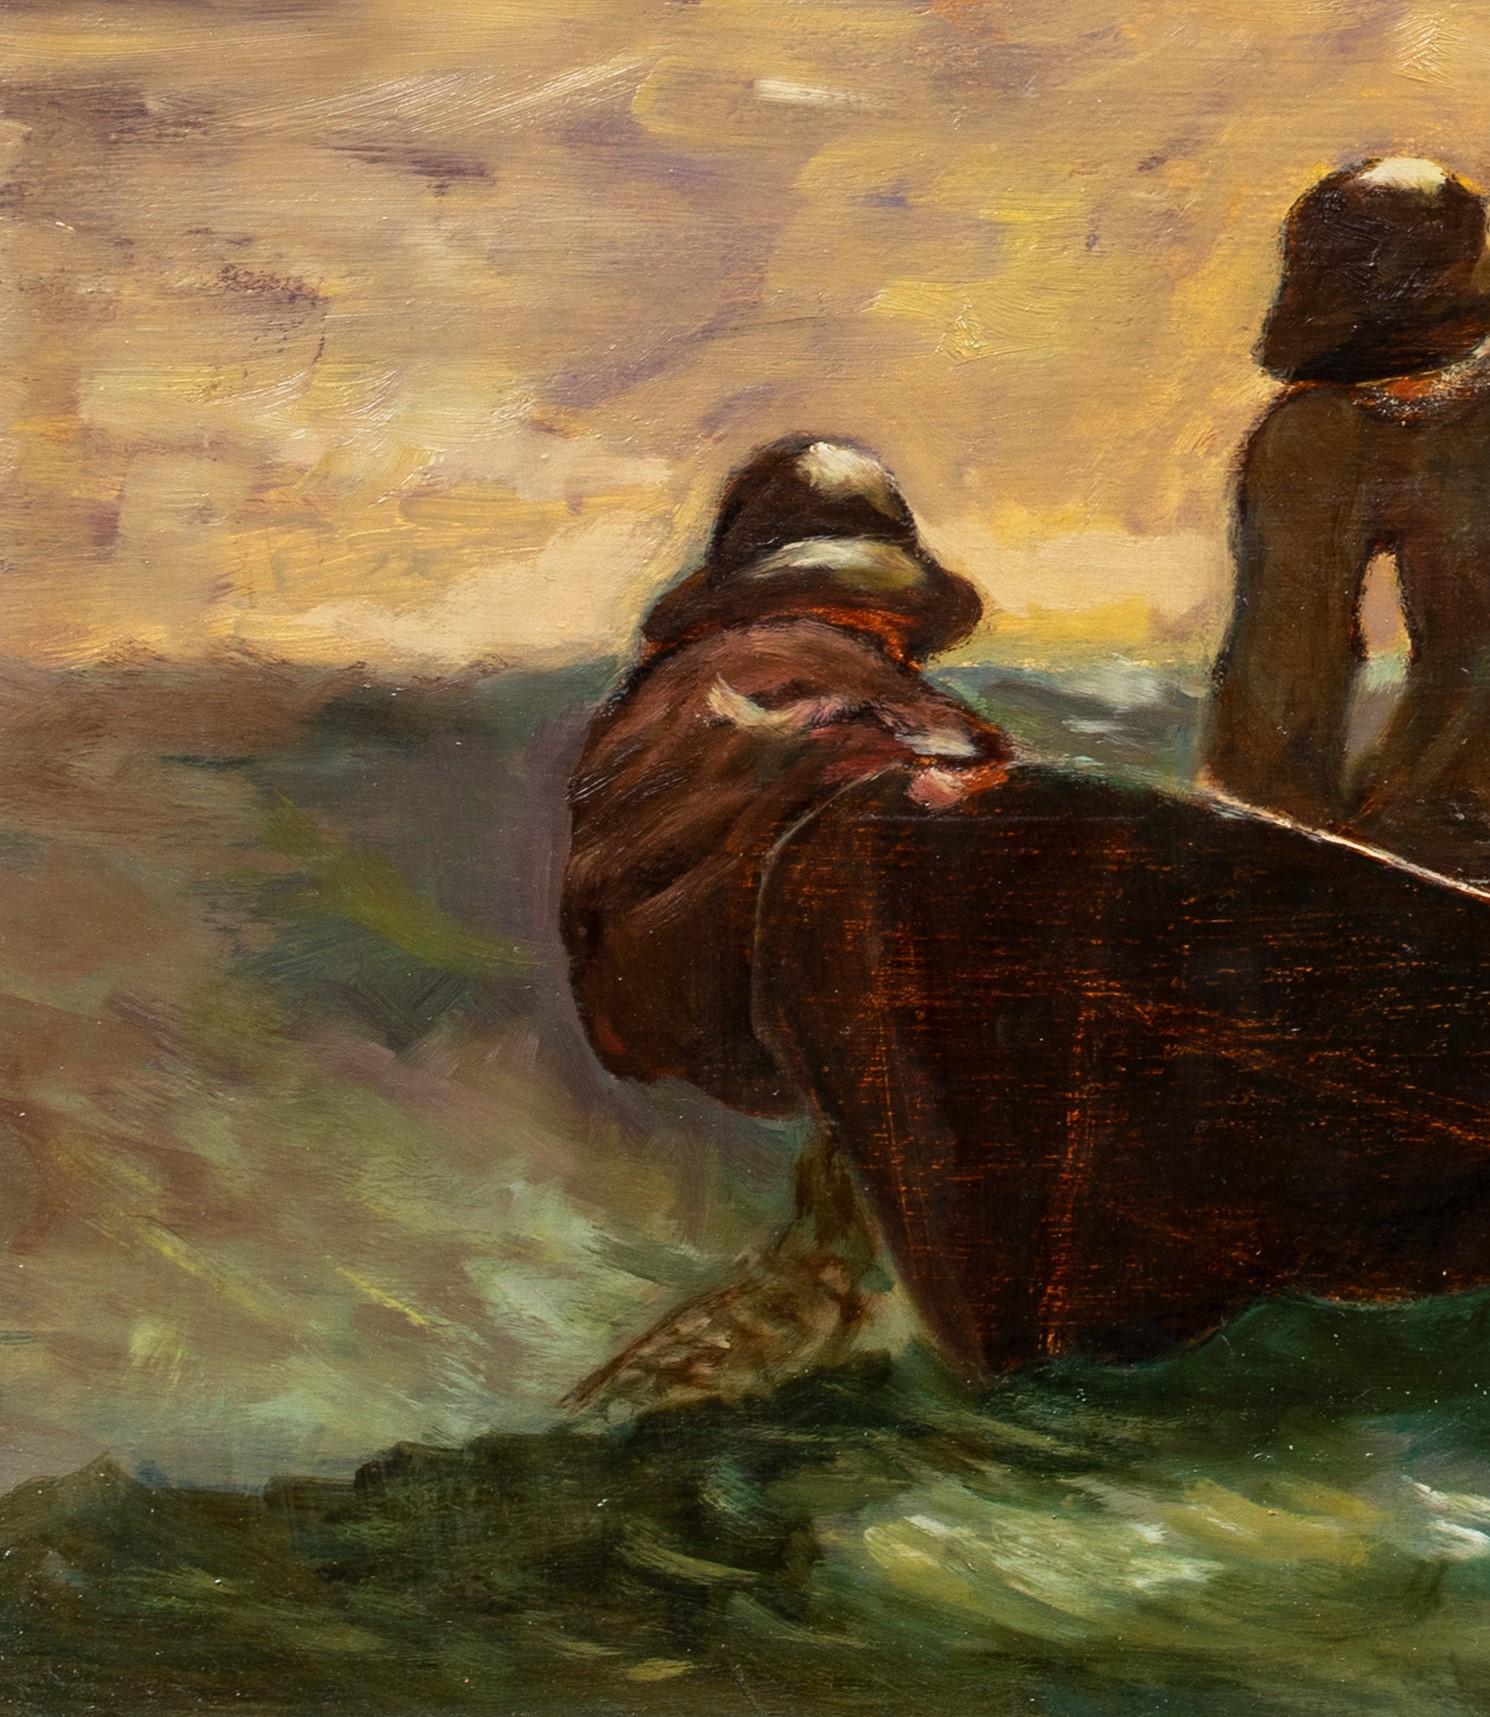 The Herring Net, circa 1900 - Brown Portrait Painting by Winslow Homer